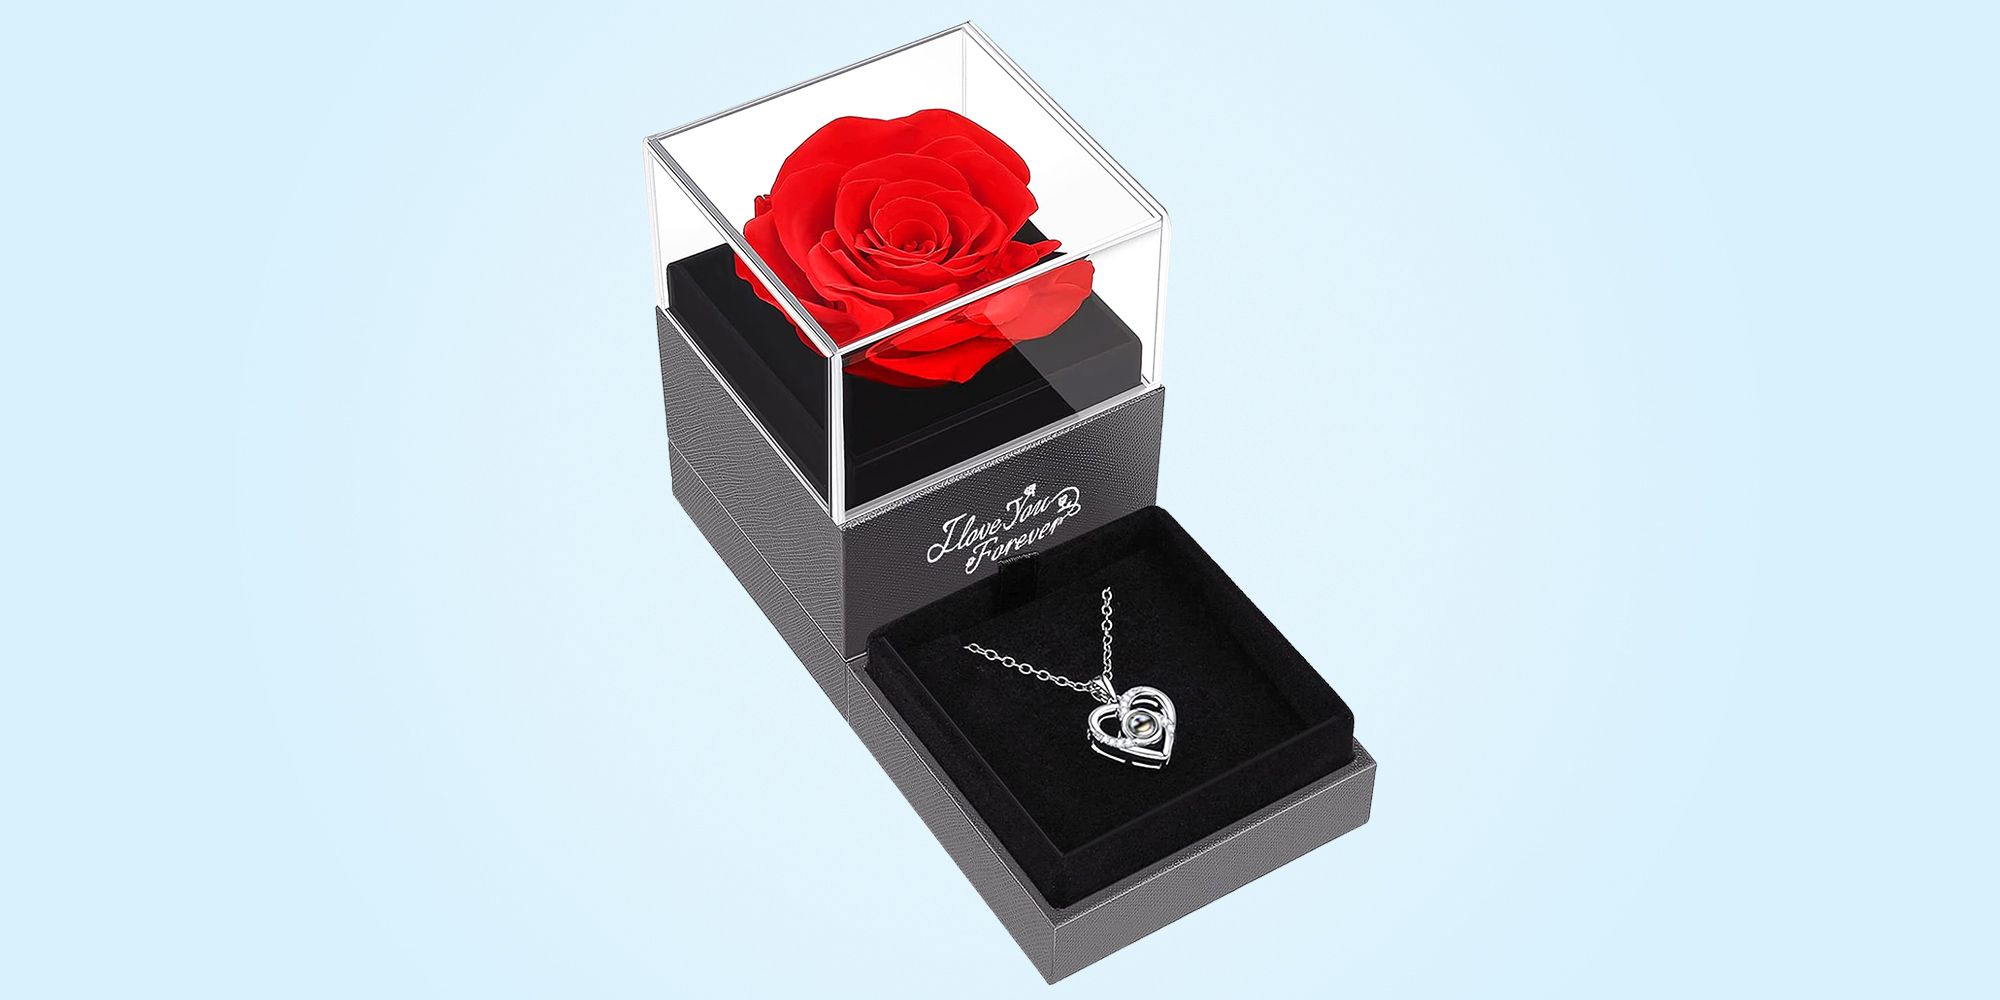 I Love You Gift Ideal Present Birthday Anniversary For Him Her Man Women Wife-UK 